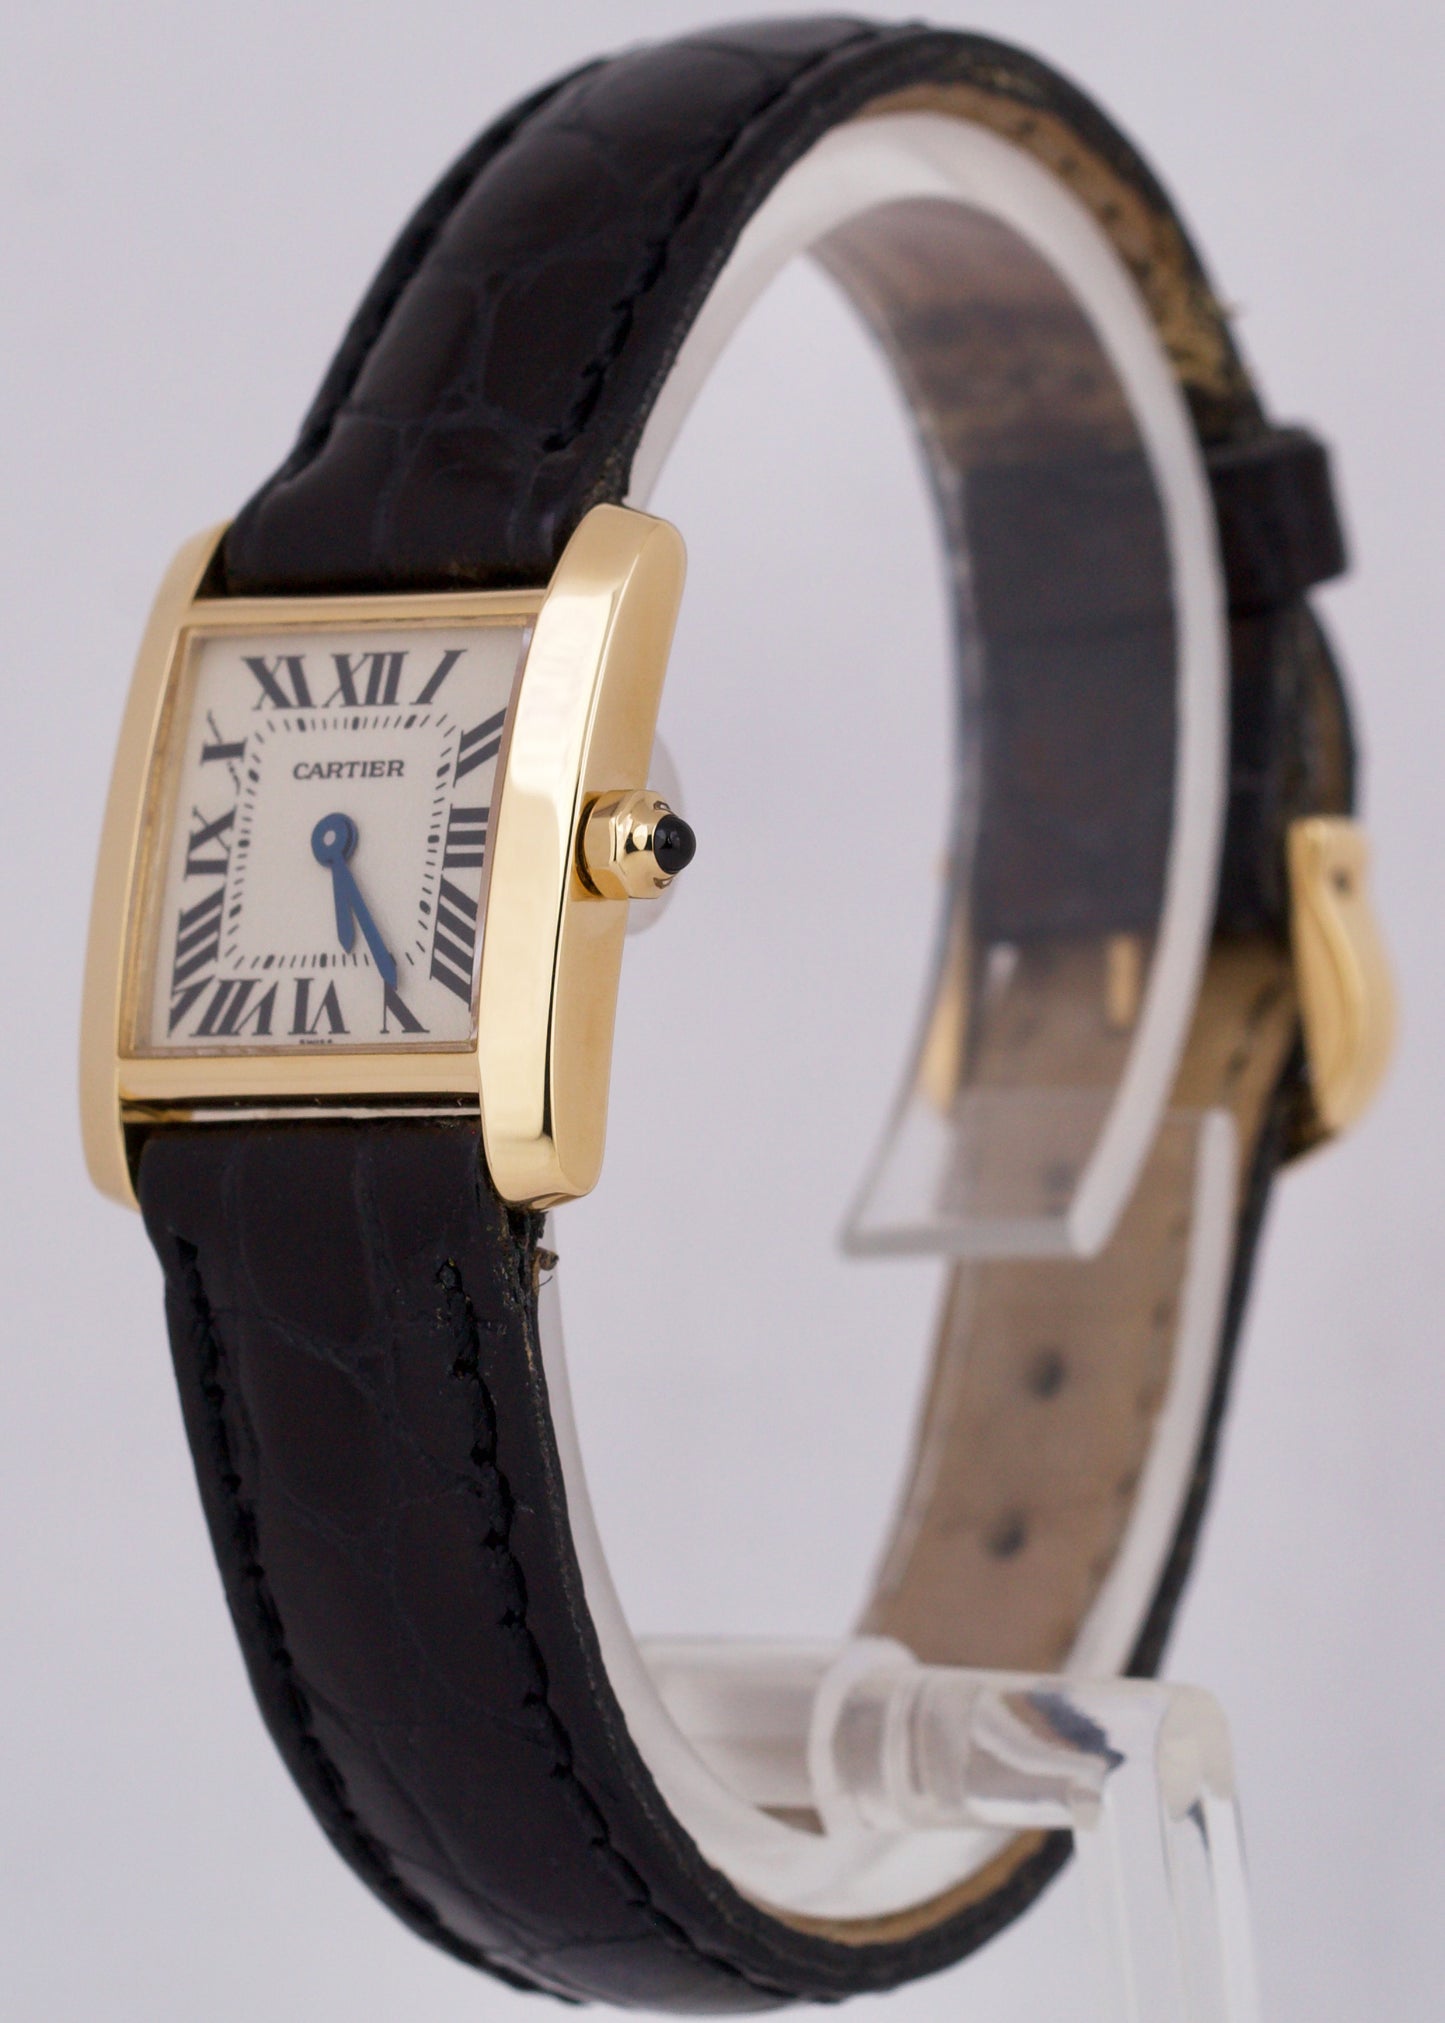 PAPERS Cartier Tank Francaise 18k Yellow Gold Ivory 20mm Quartz Leather 1820